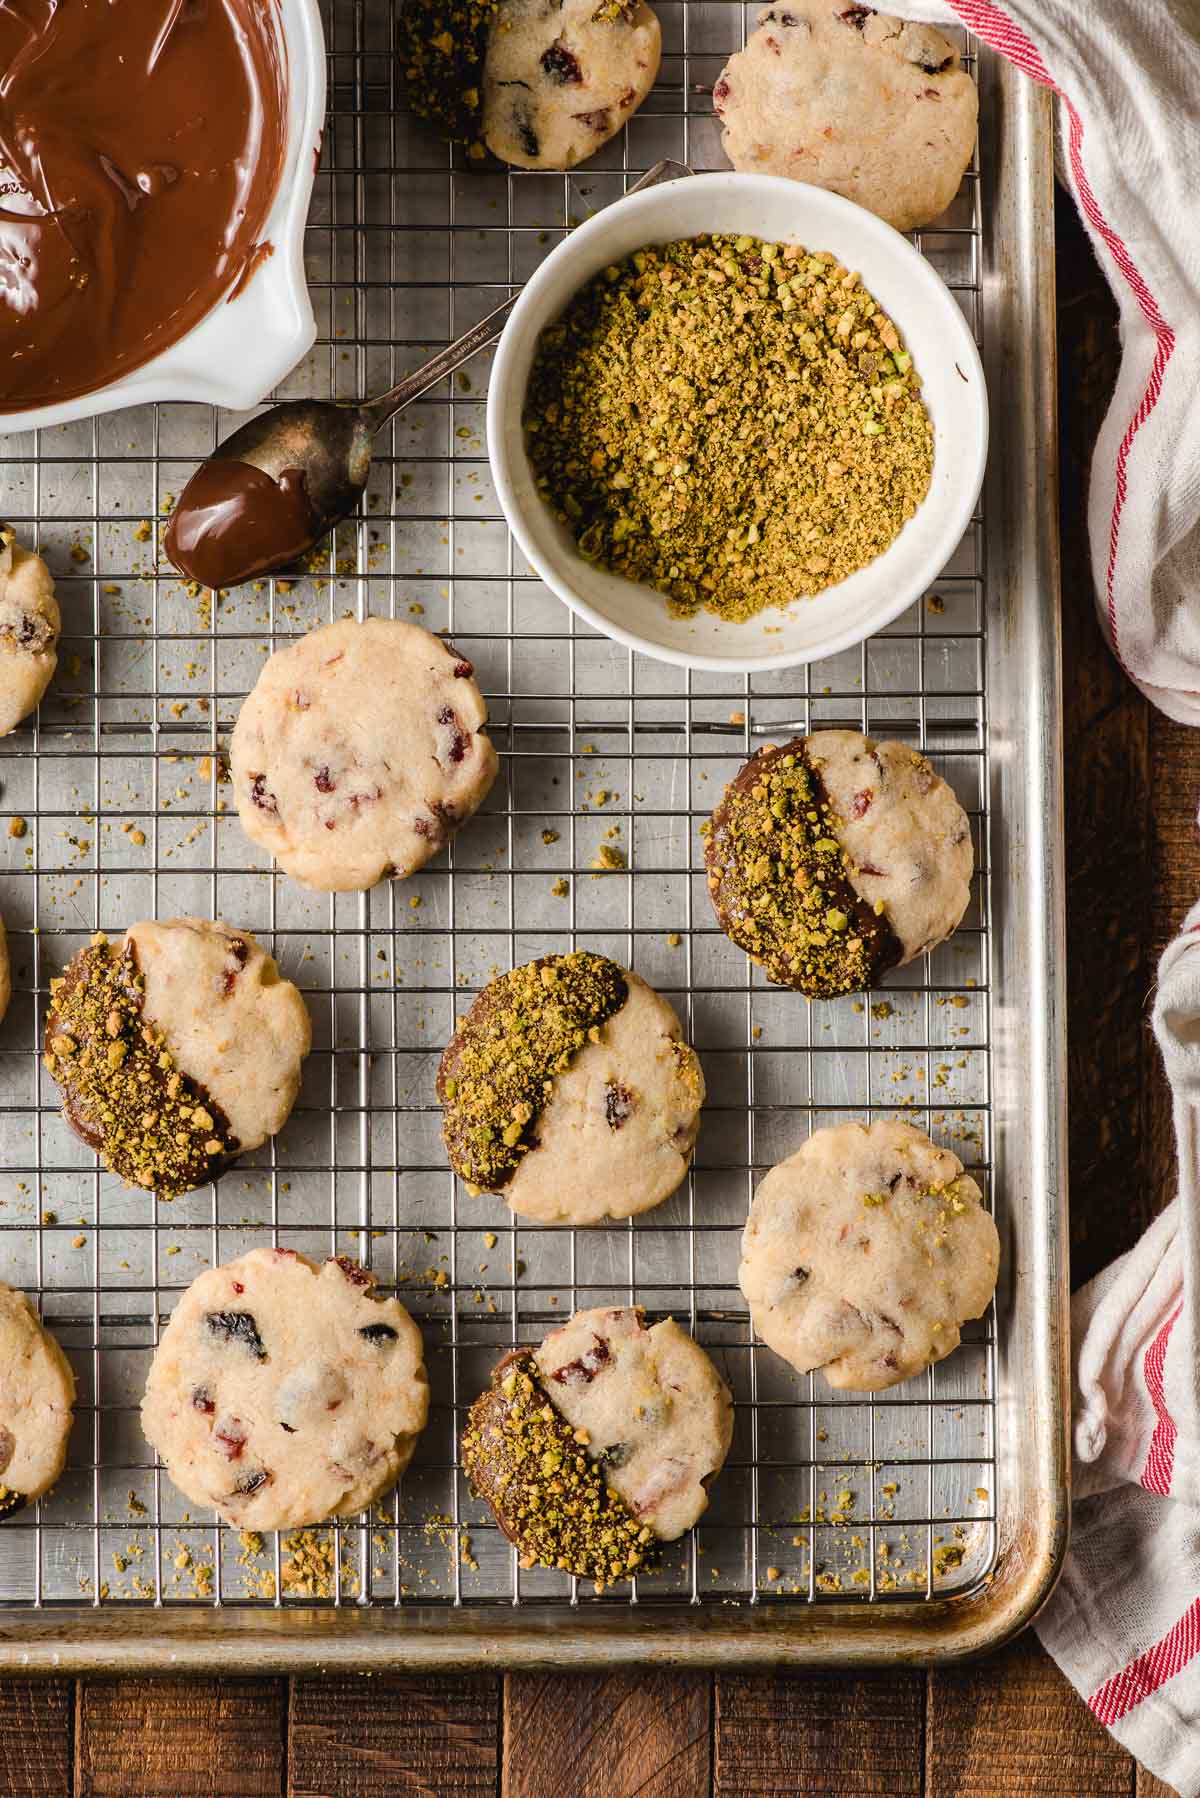 Baking sheet with a cooling rack on top. Multiple cranberry shortbread cookies are on top, some are dipped in semi-sweet chocolate and ground pistachios, others are plain.